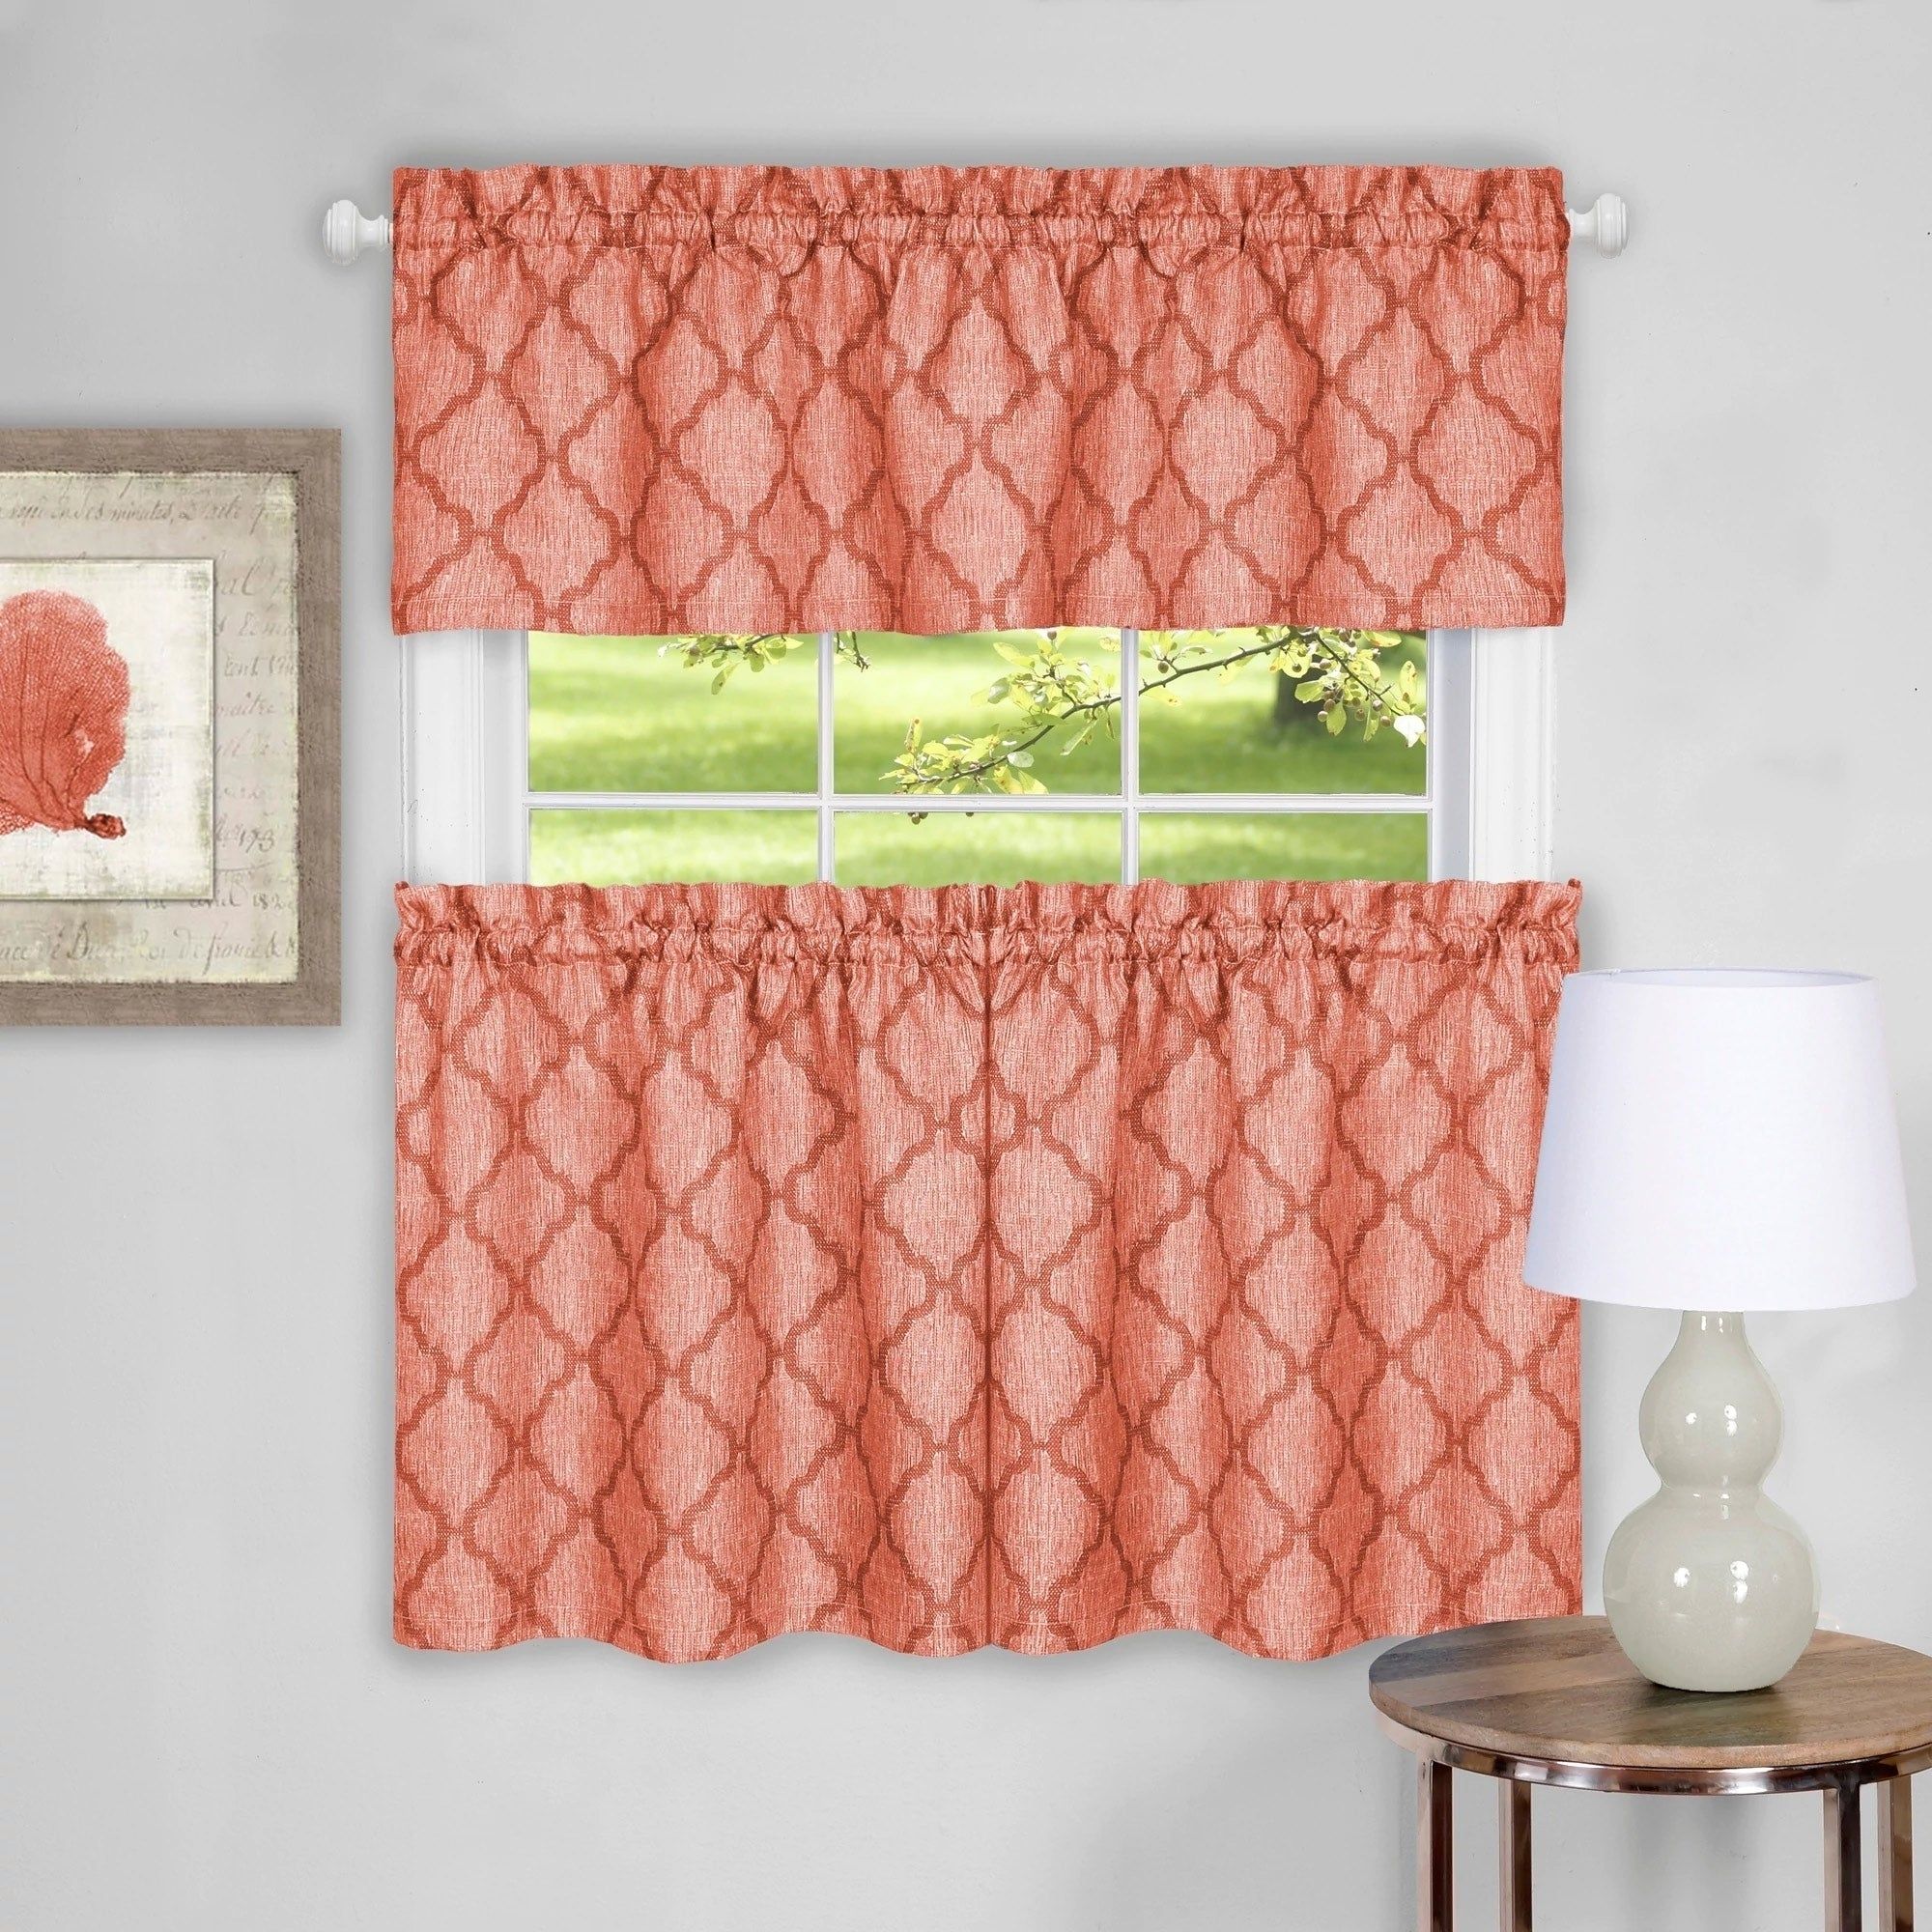 Trellis Pattern Tier And Valance Curtain Set  24" Orange – 24 Inch Intended For Trellis Pattern Window Valances (View 19 of 20)